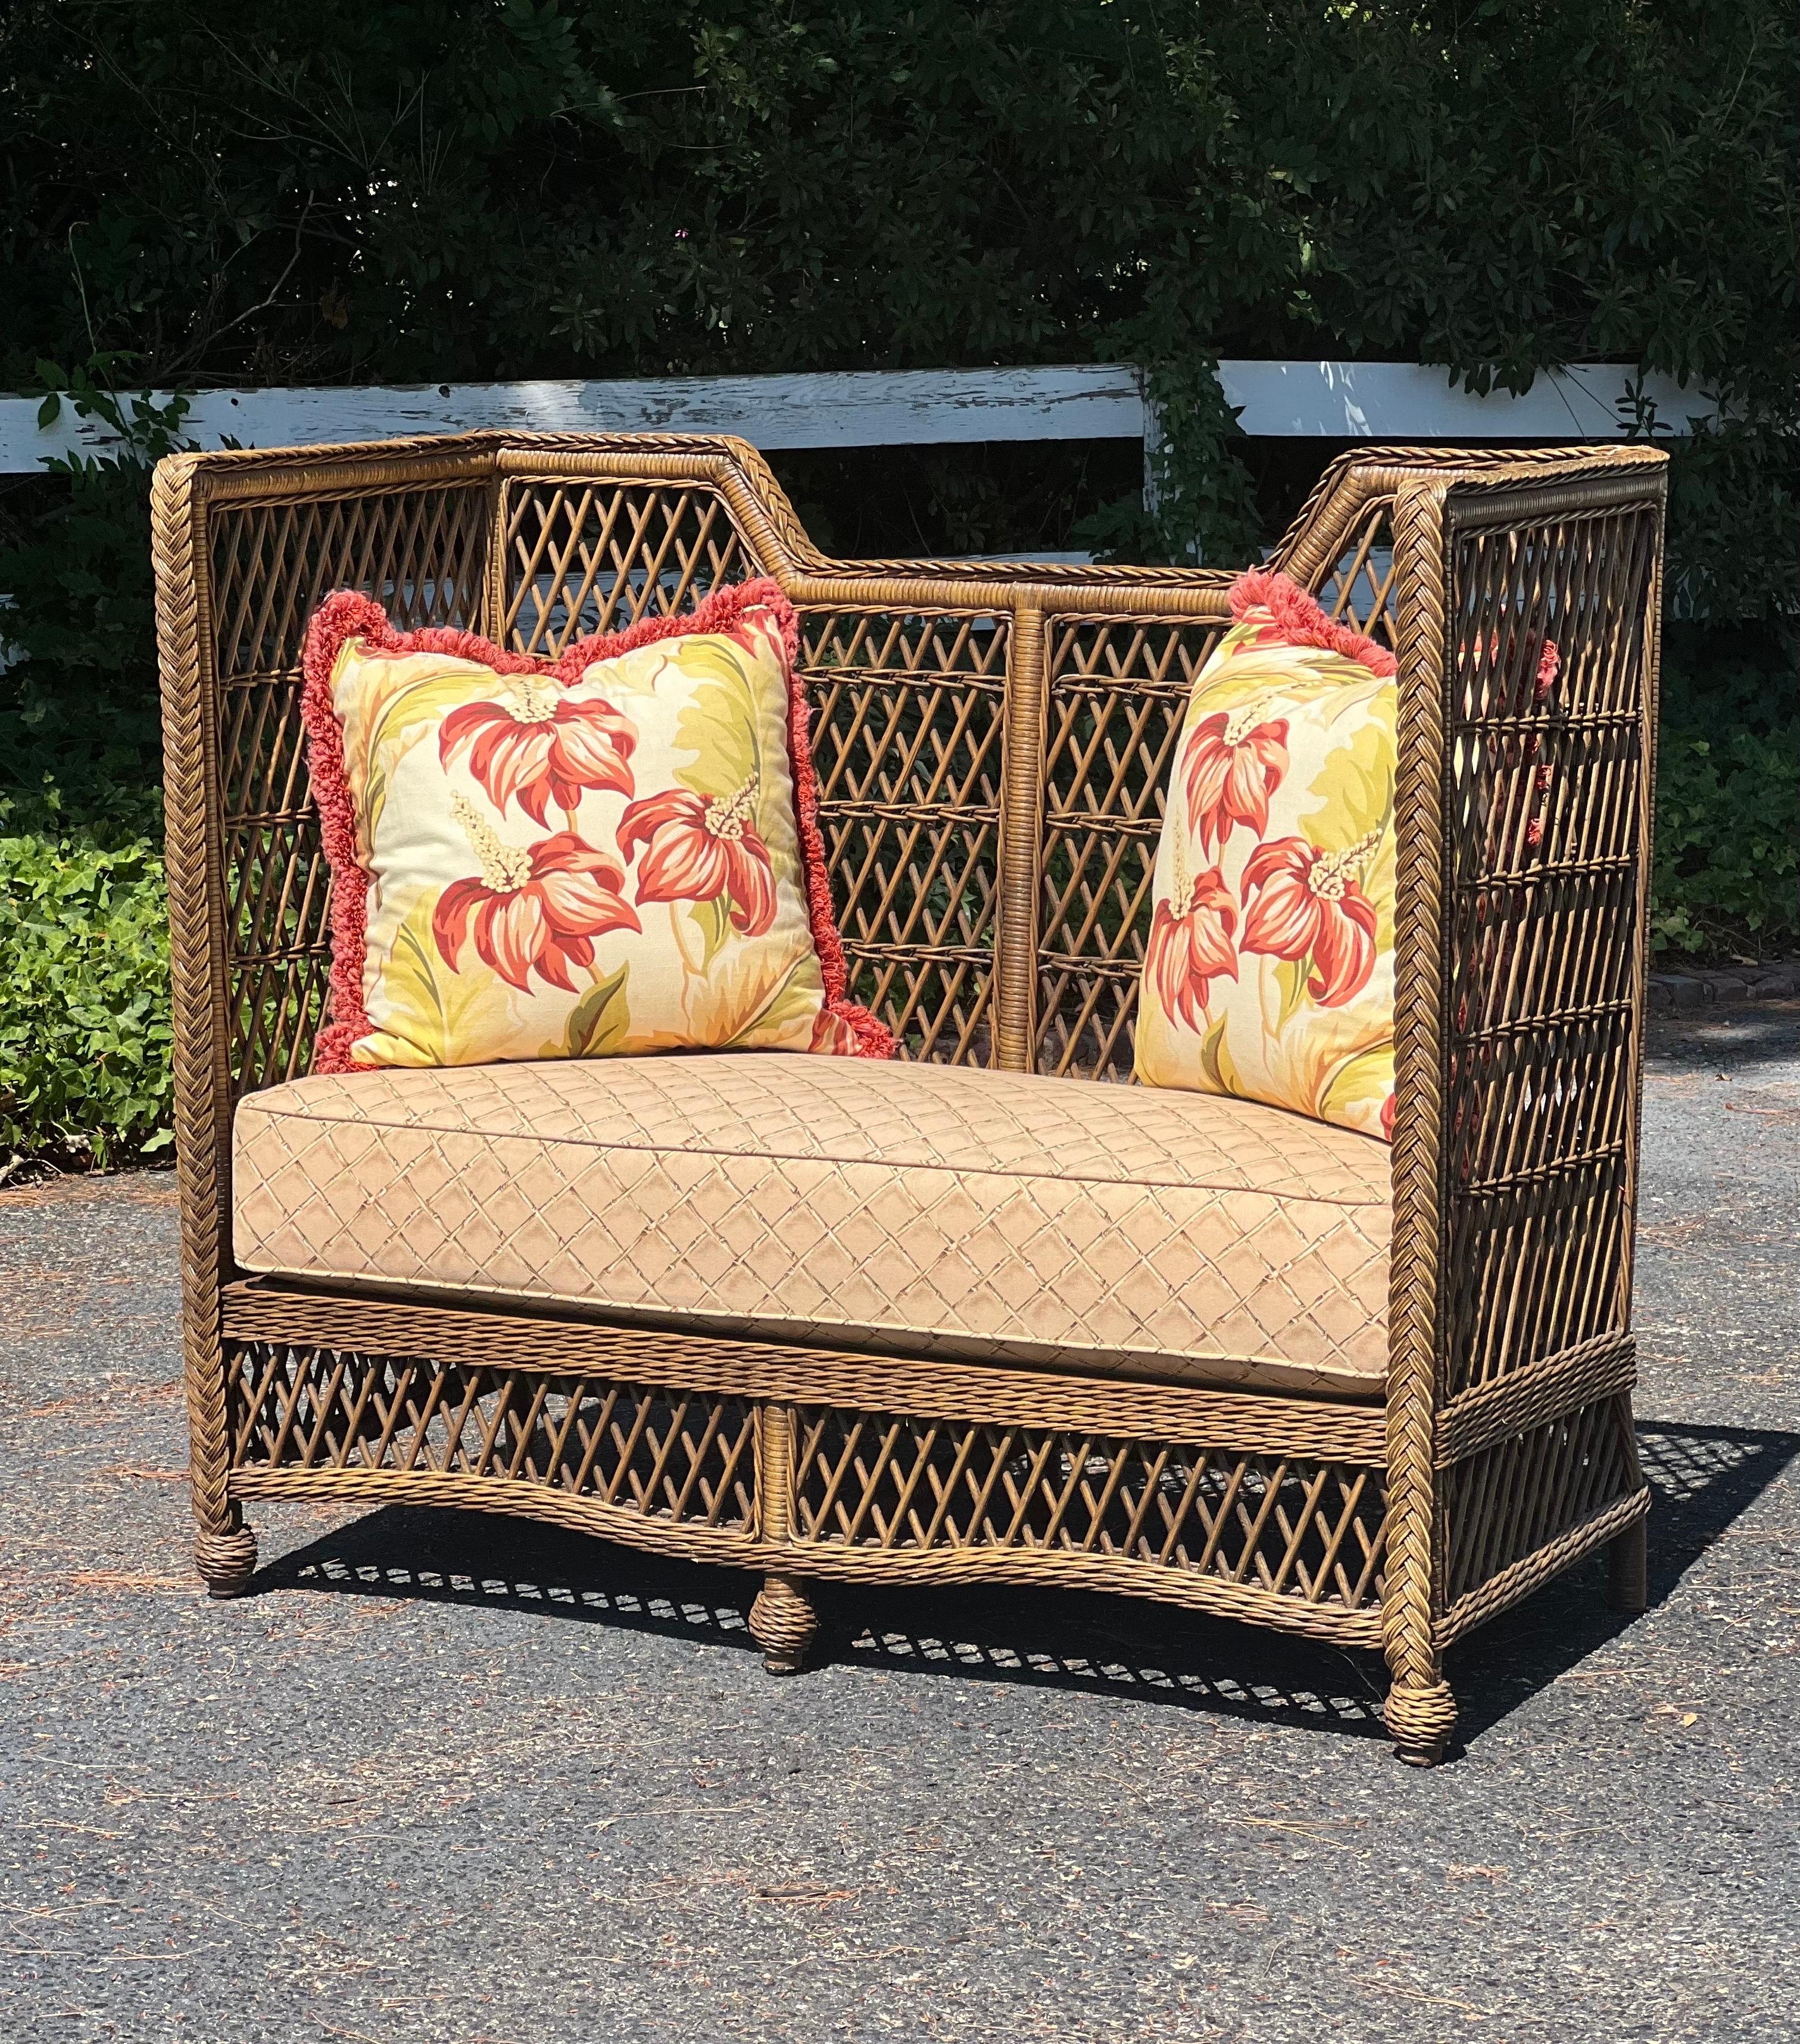 Lane Venture 'Excursions' rattan and wicker settee, 2005.

Impressive settee with single seat cushion and two coordinating pillows in very good, near mint condition.  The comfortable cushion has a lovely textured lattice print in a soft nude while